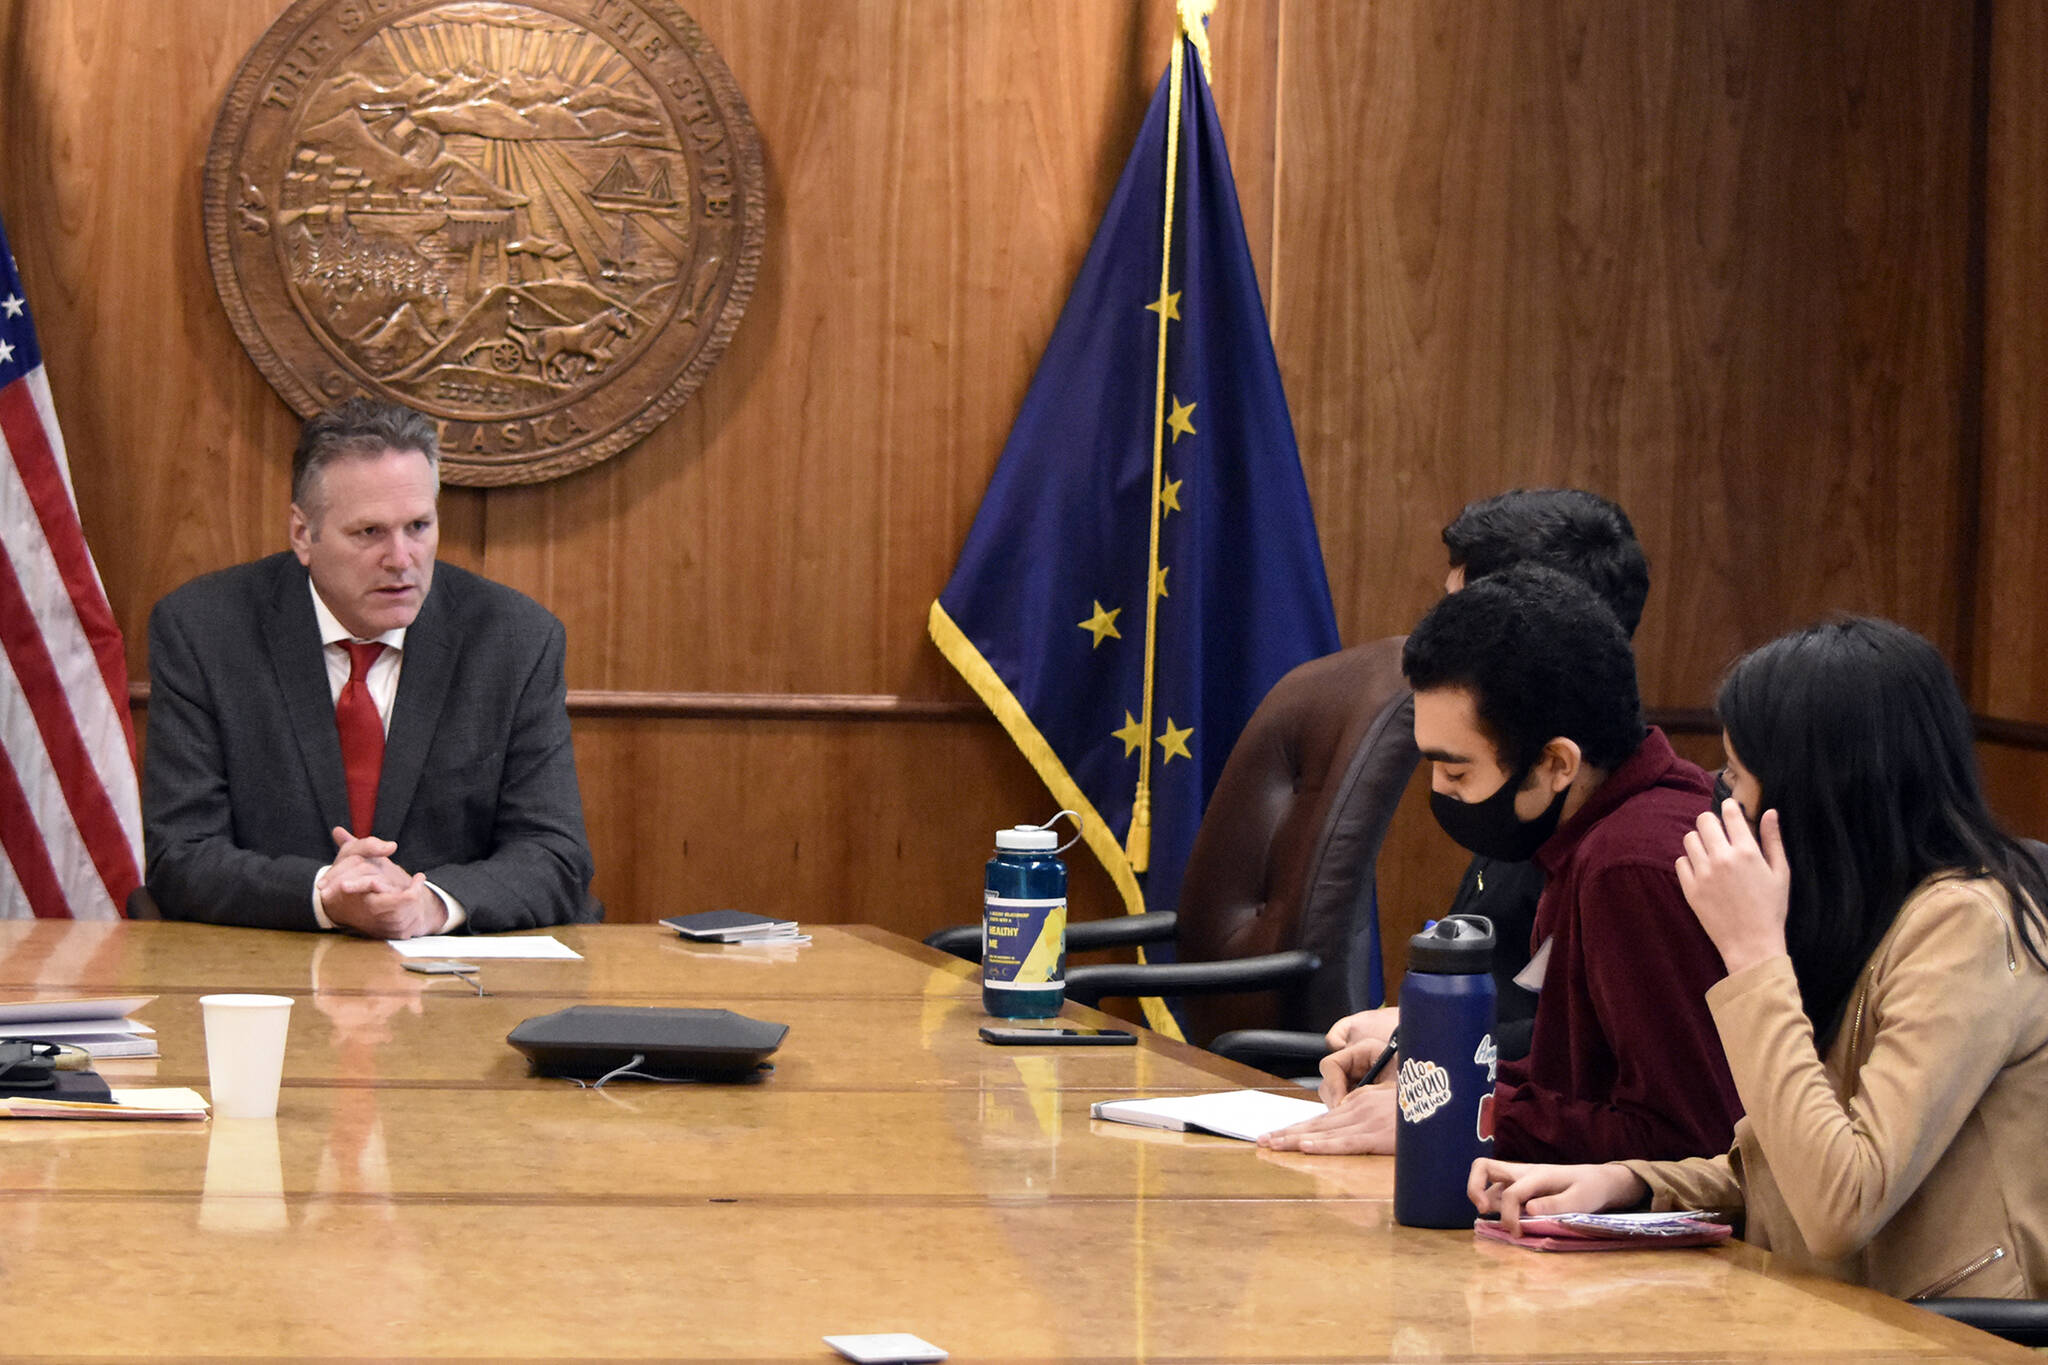 Gov. Mike Dunleavy, left, meetings with international exchange students at the Alaska State Capitol on Wednesday, March 16, 2022. The students, who each come from different counrties, have been living with host families in Sitka and Juneau and attending local high schools. (Peter Segall / Juneau Empire)